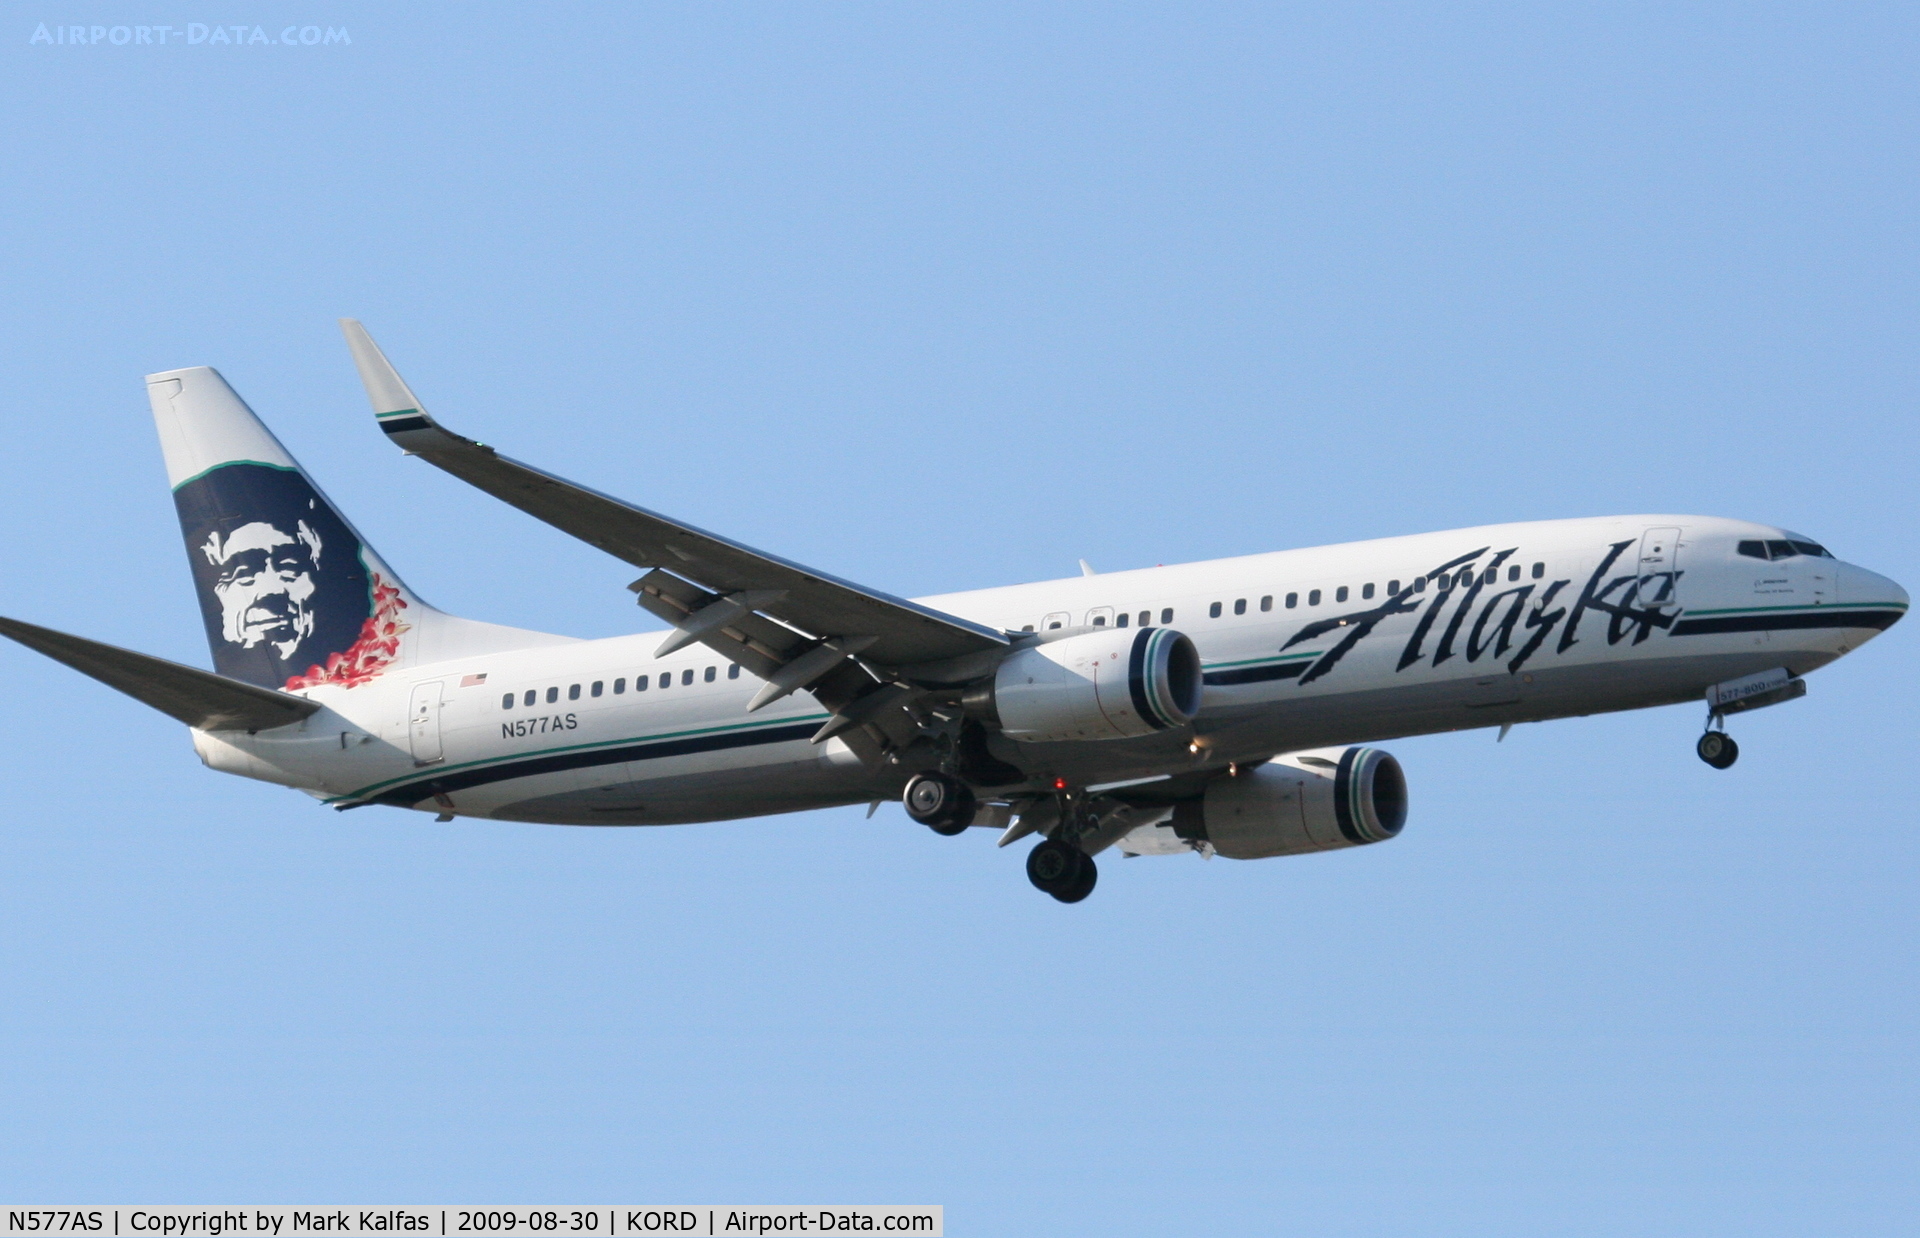 N577AS, 2007 Boeing 737-890 C/N 35186, Alaska Airlines Flt.#130 from PANC is on final for RWY 10 KORD.